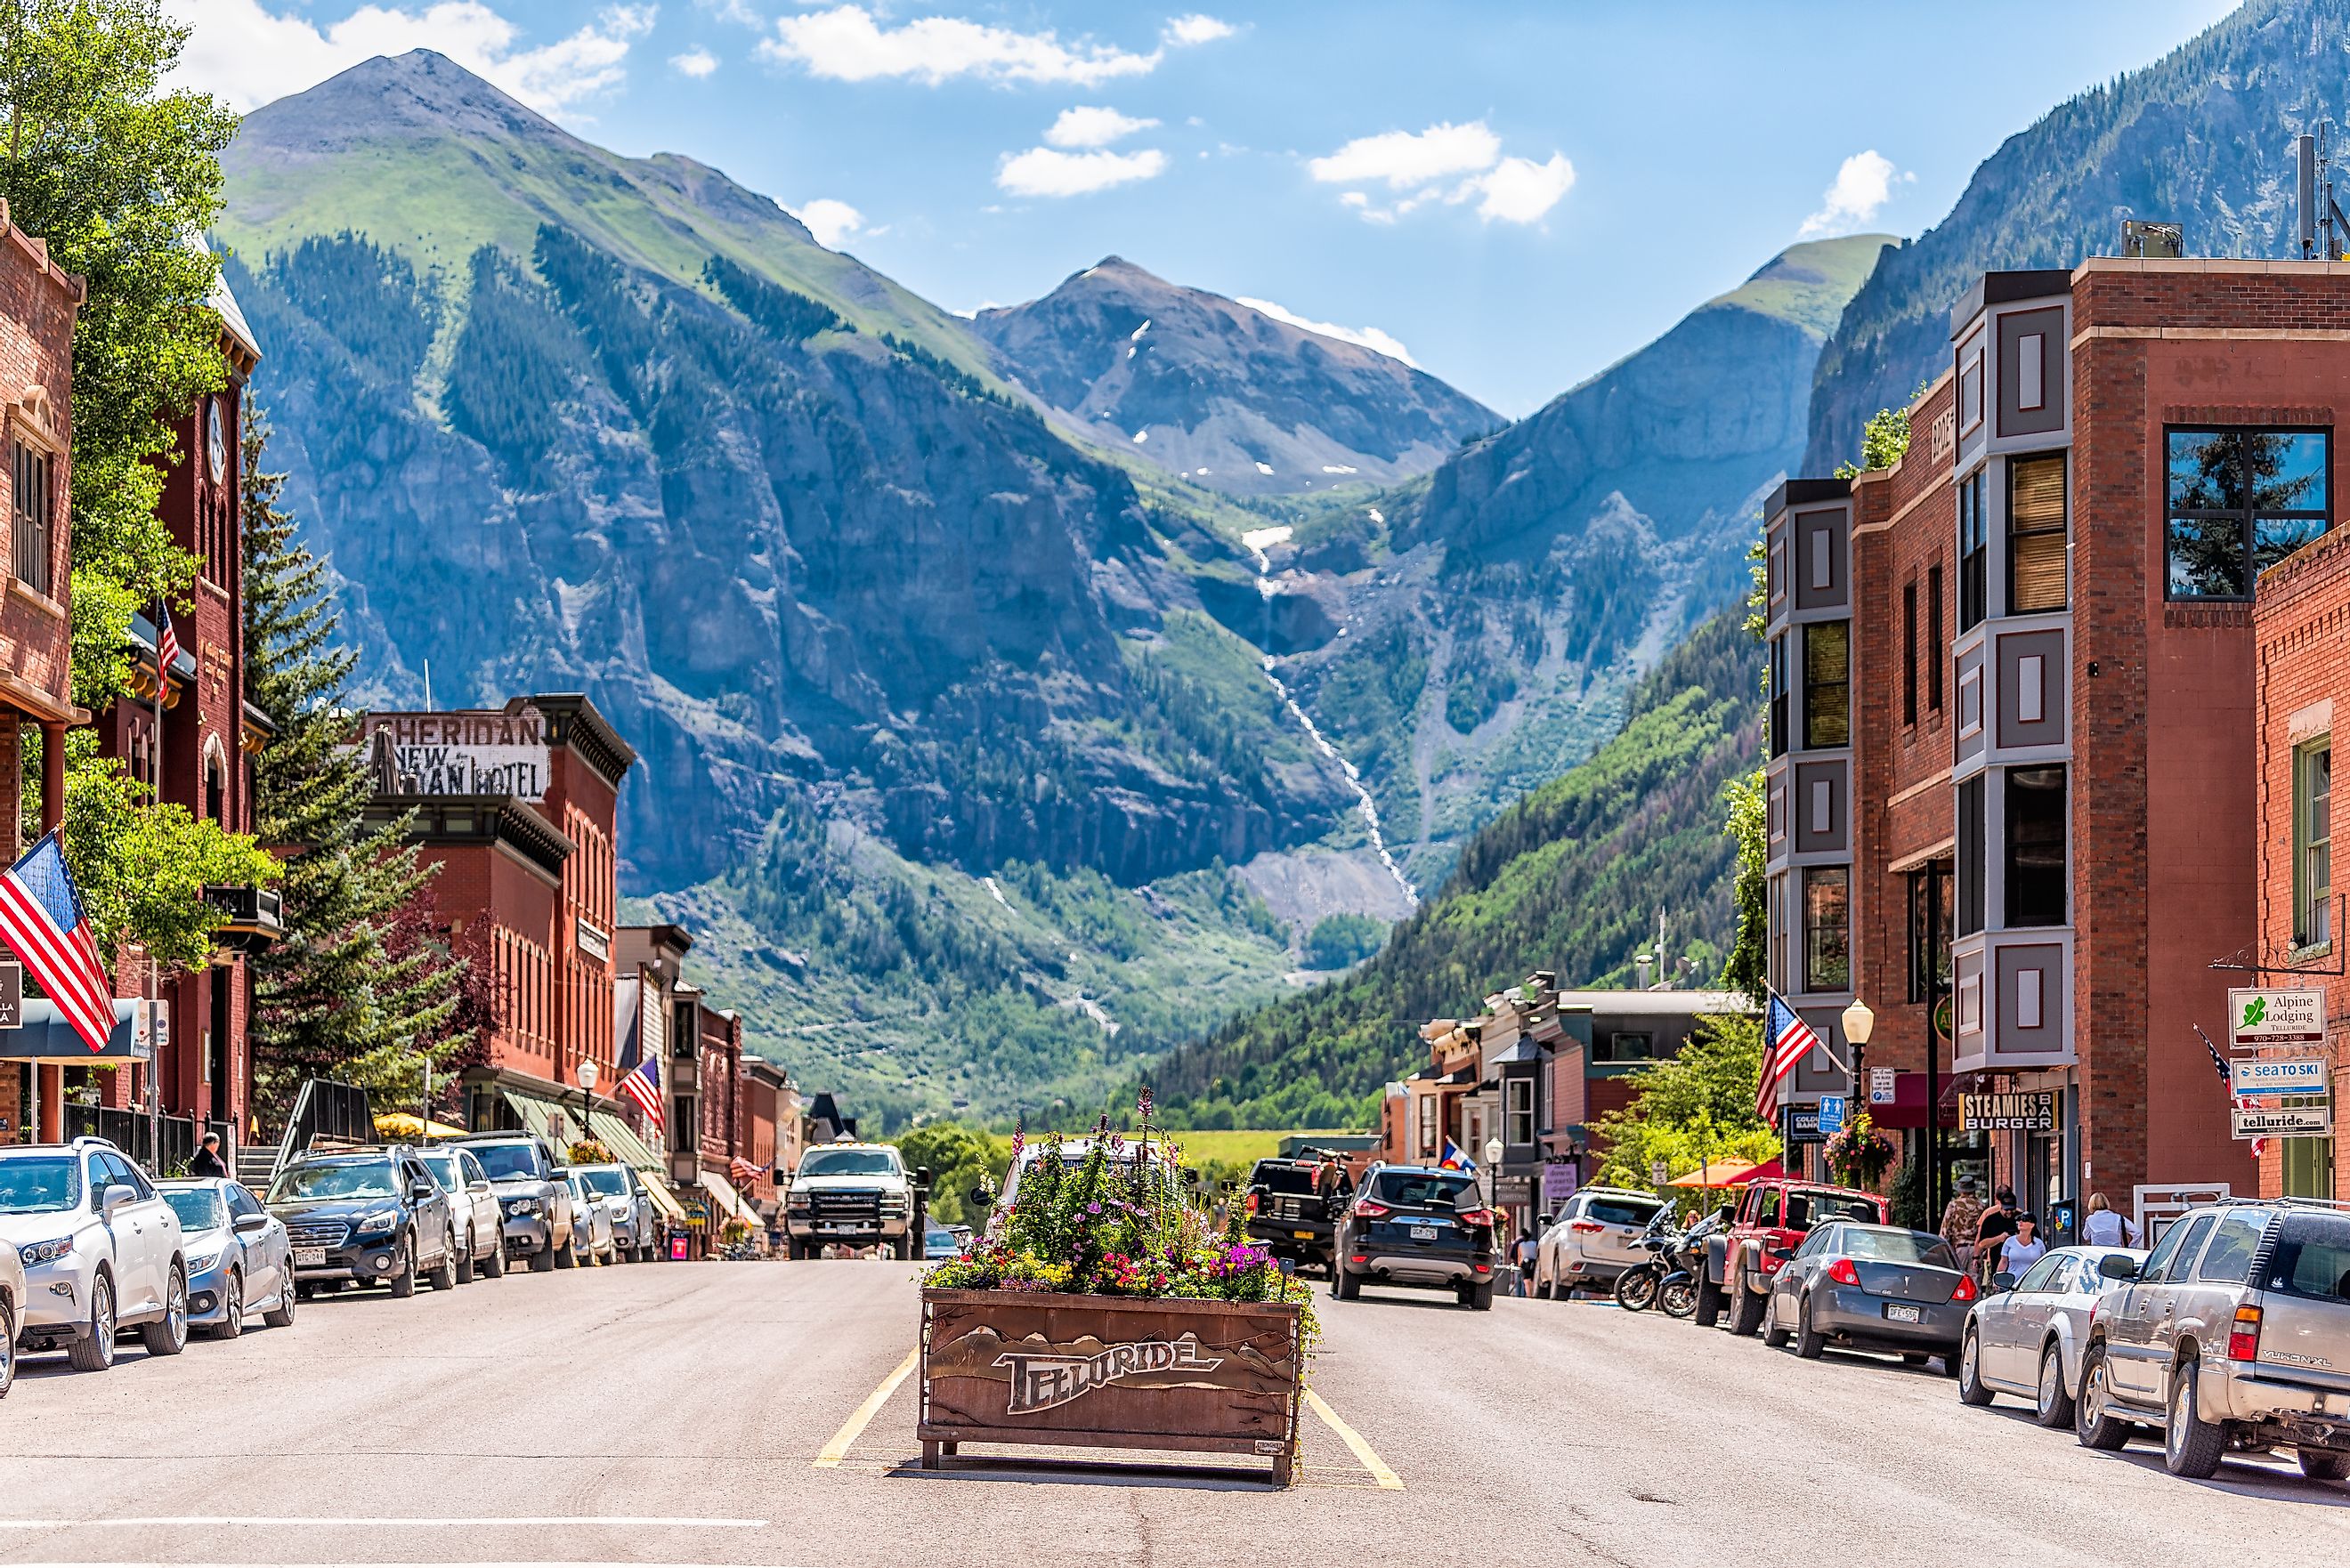 The charming Colorado town of Telluride.